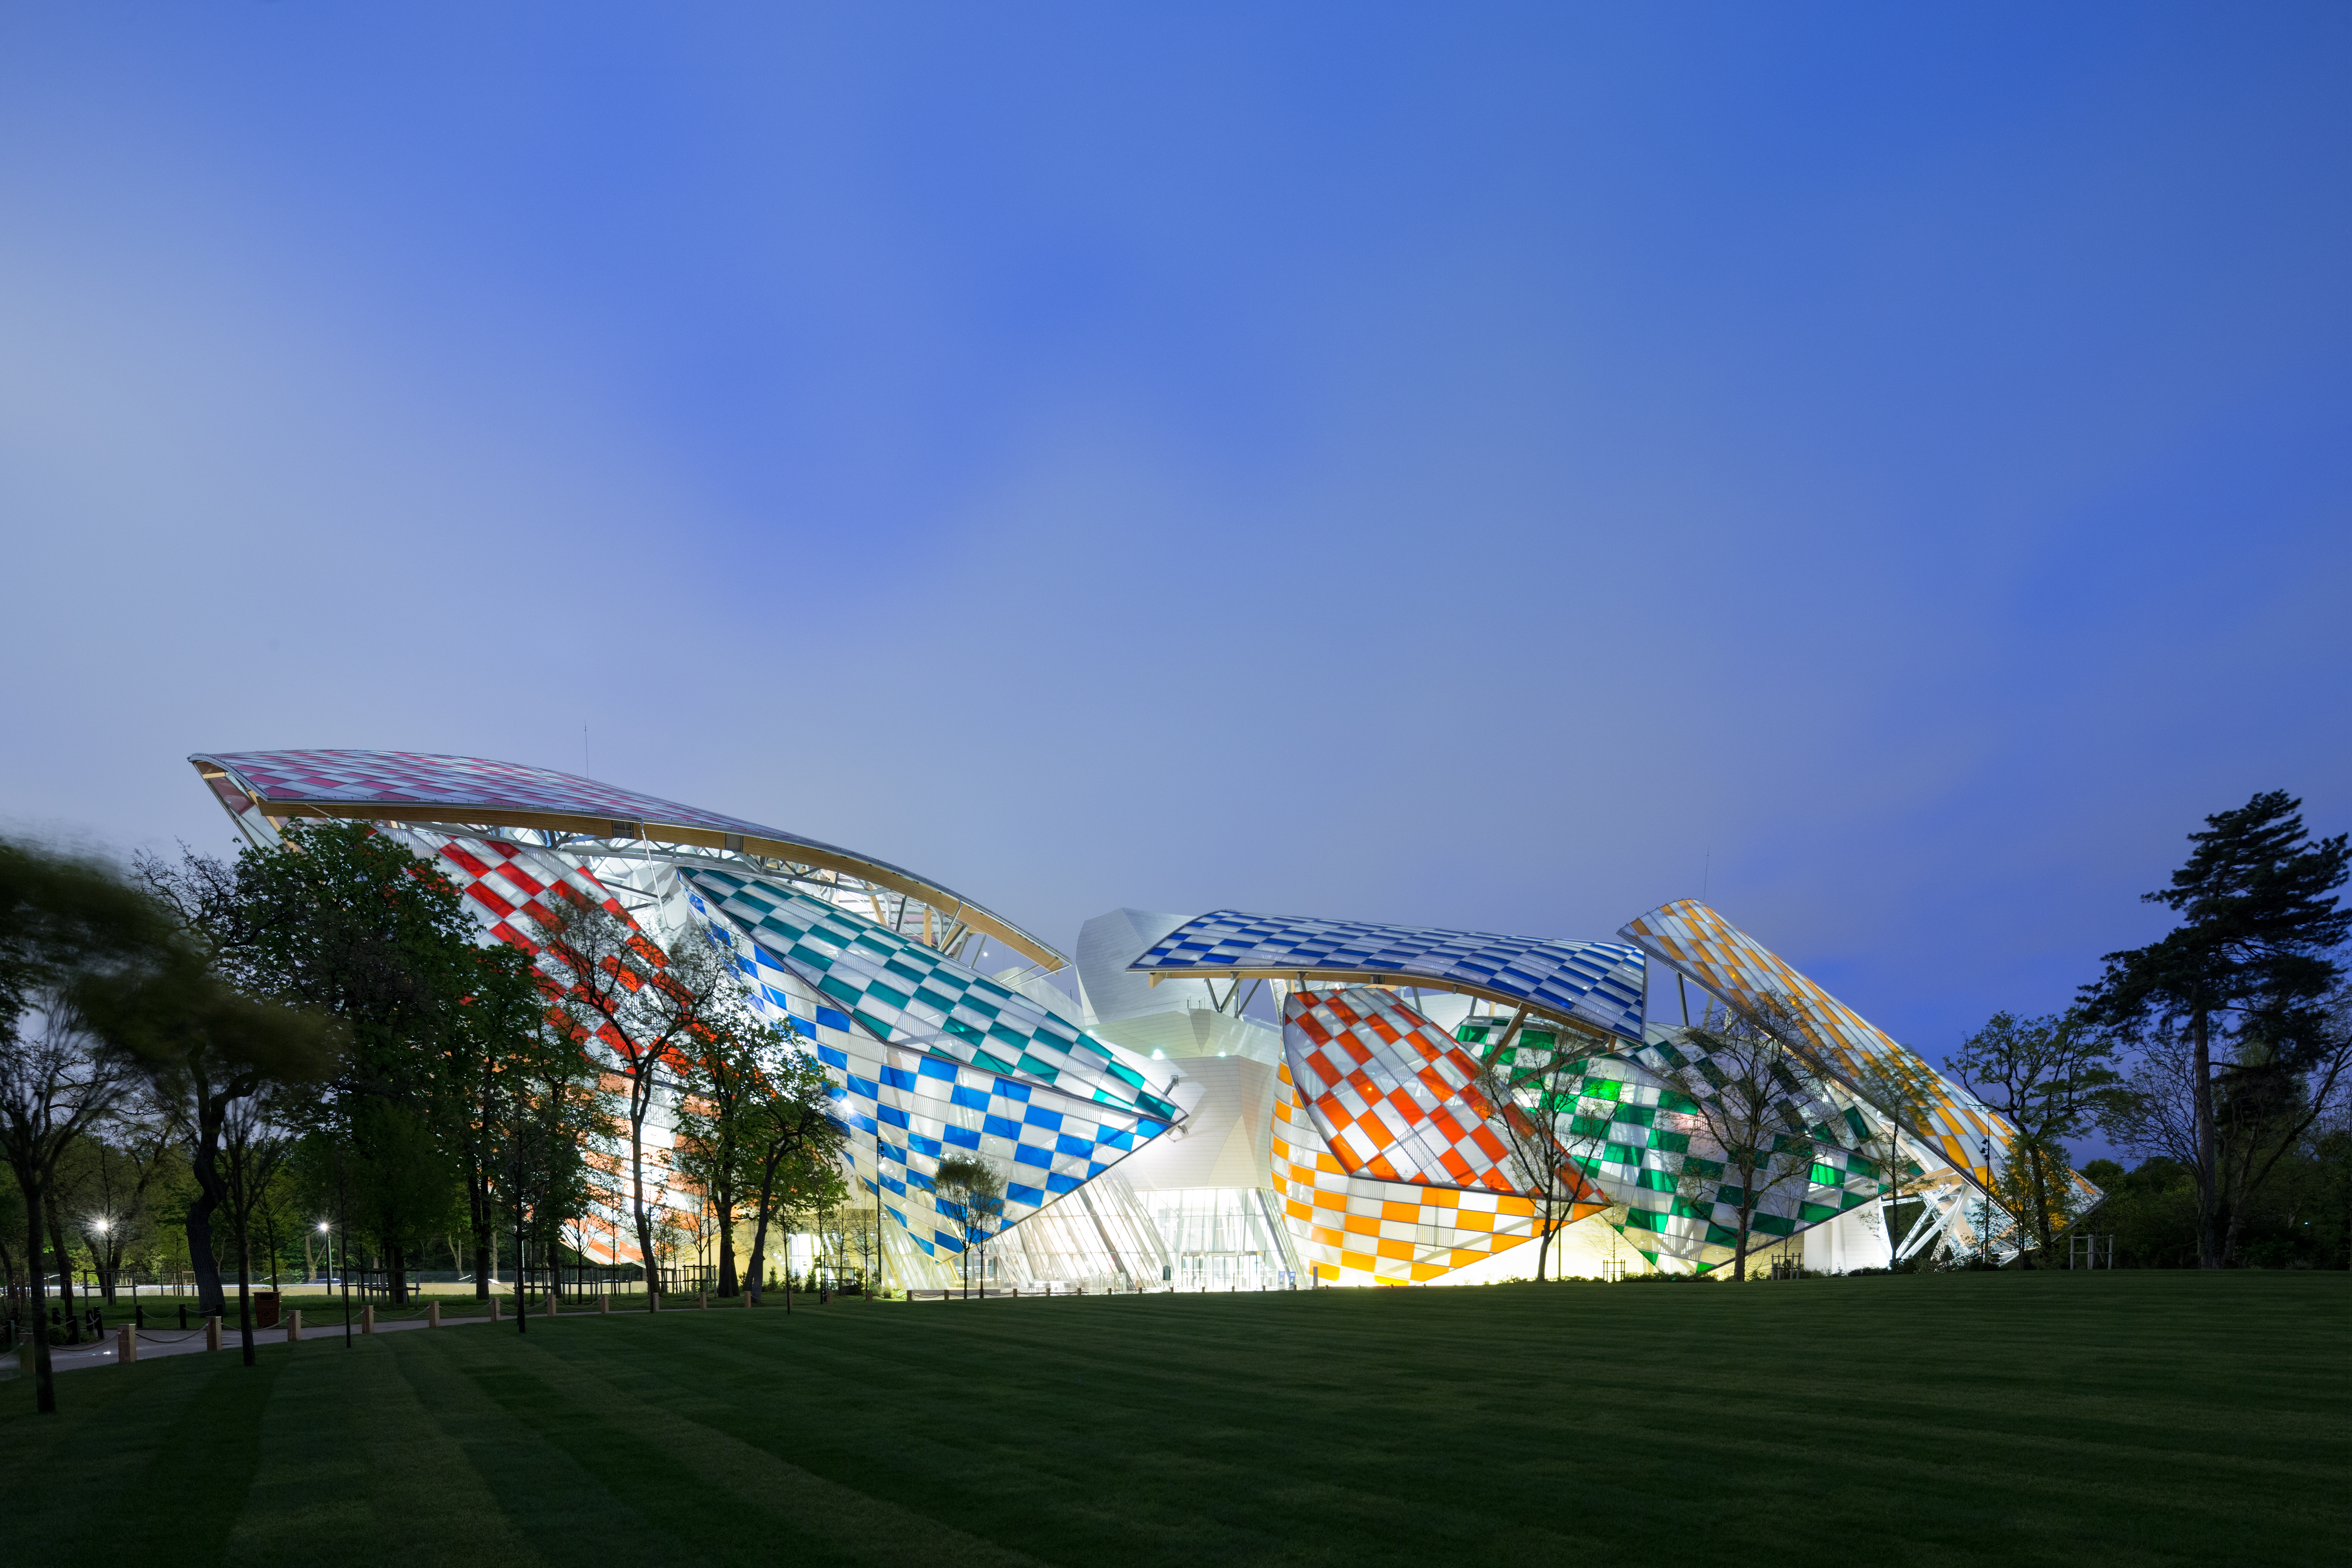 The Observatory of Light at the Fondation Louis Vuitton - www.semashow.com